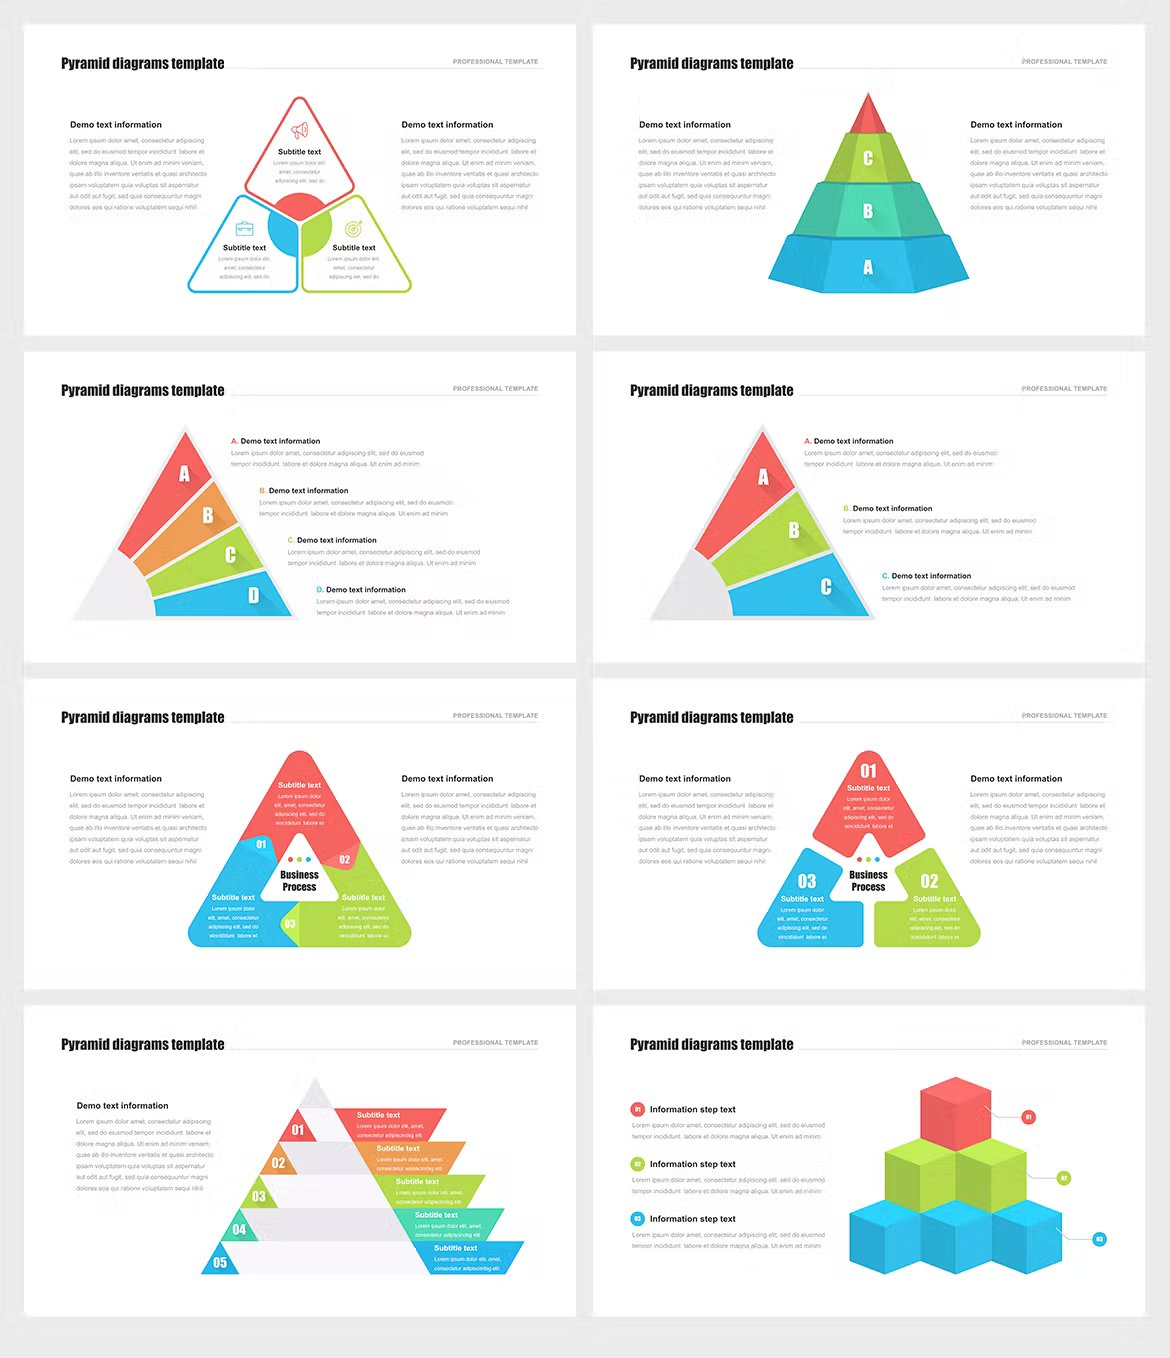 A set of 8 different pyramid infographic templates in black, white, blue, green and red on a gray background.